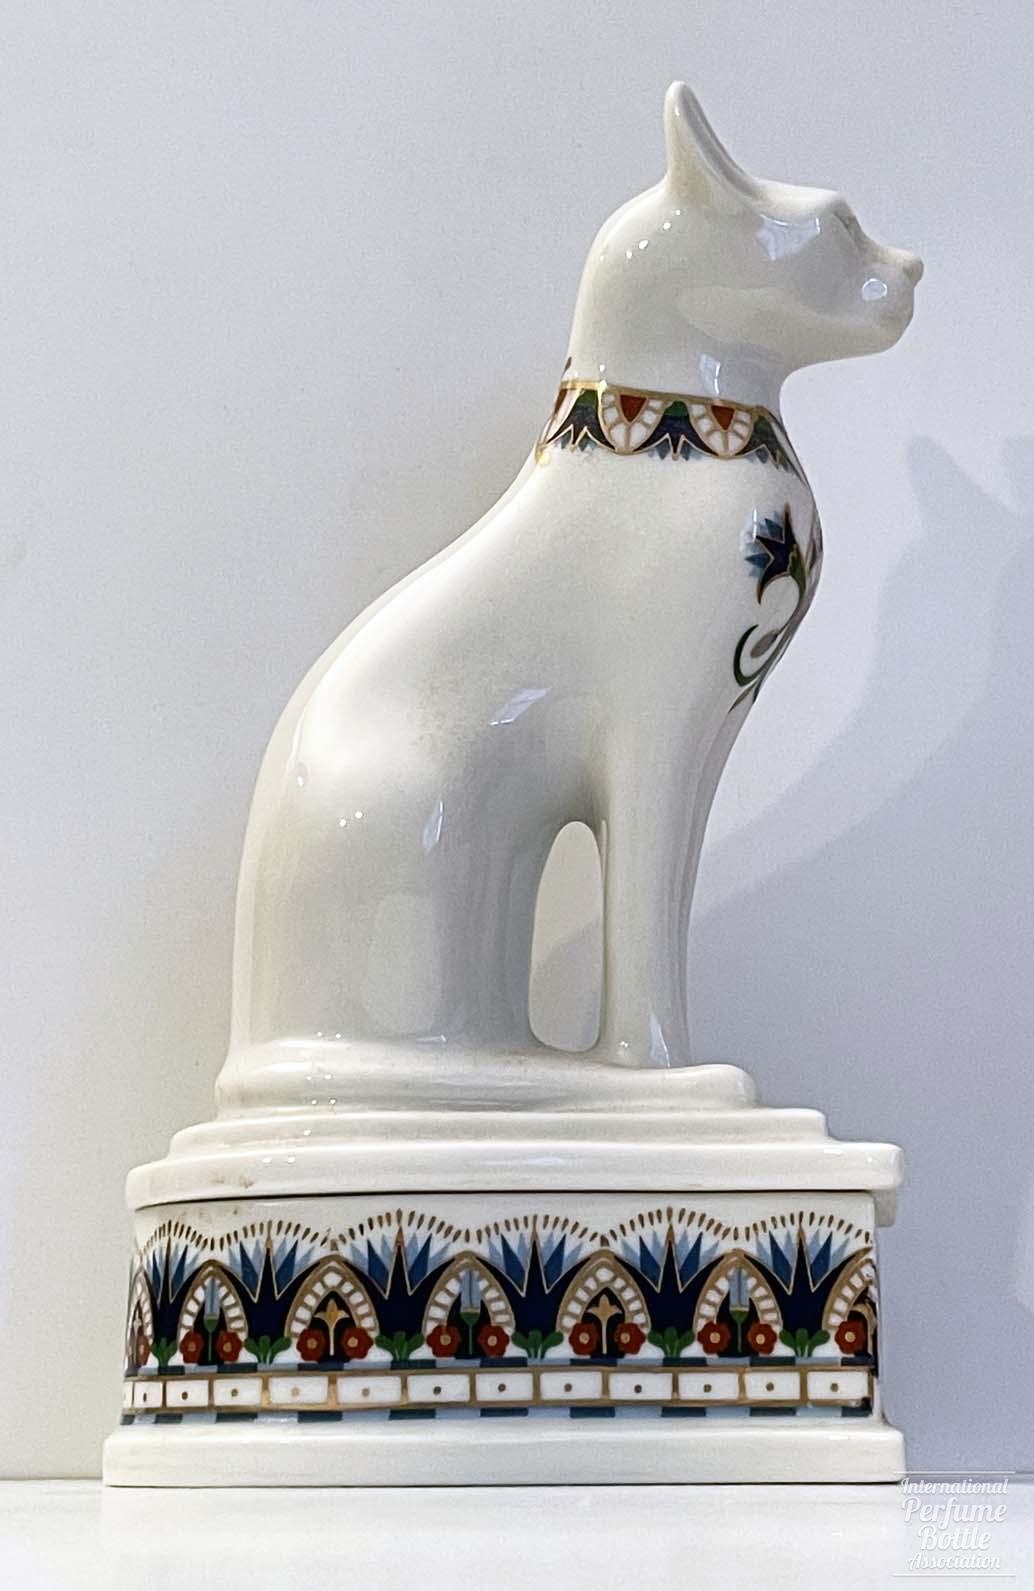 "Cleopatra's Cat", Treasures of the Pharaohs Series by Elizabeth Arden